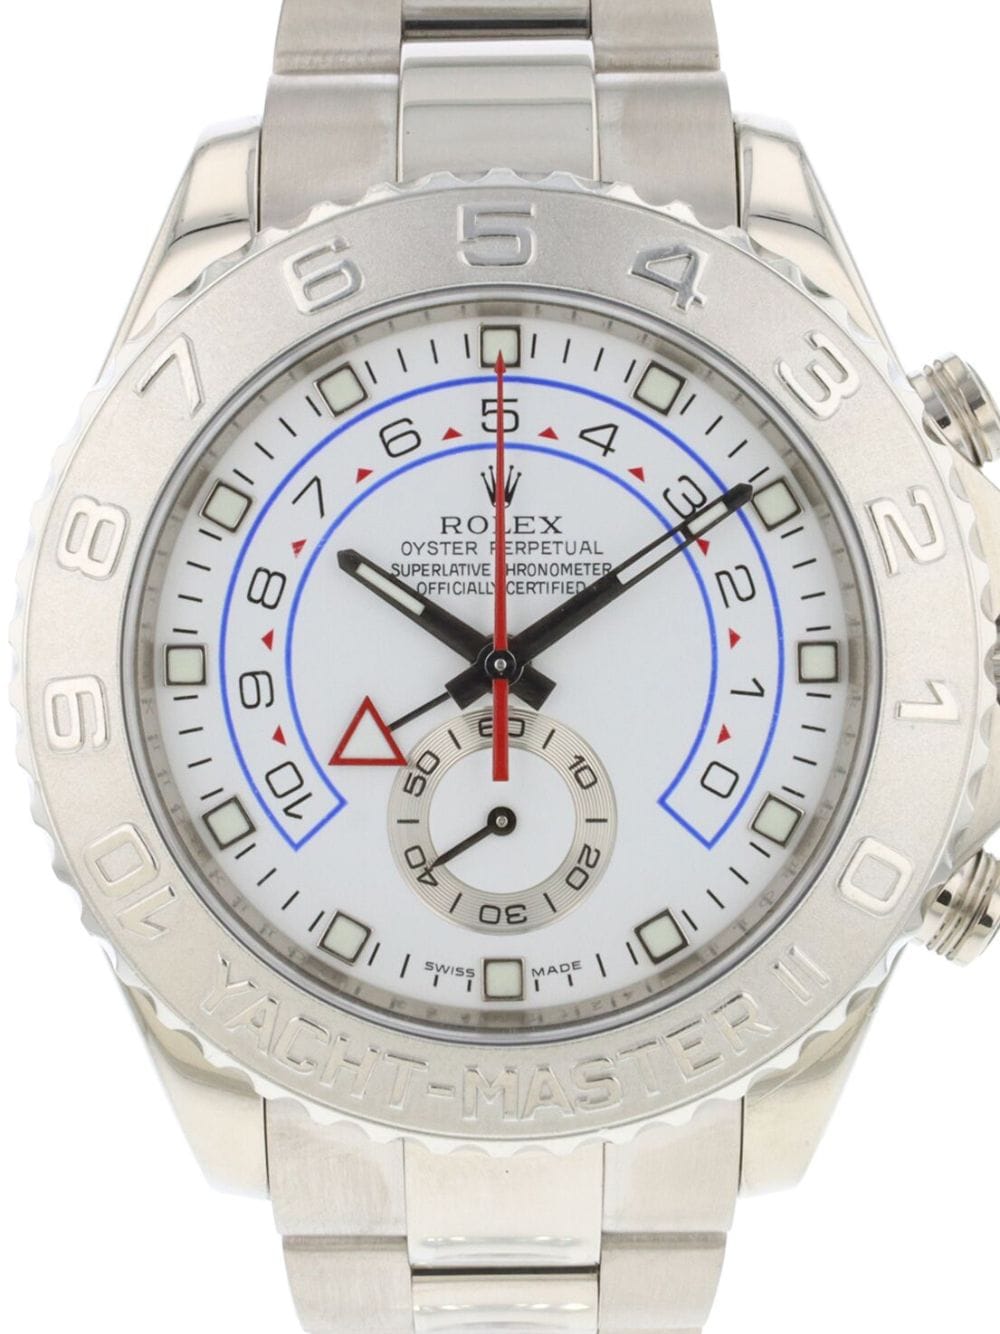 Pre-owned Rolex Yacht-master Ii 44毫米腕表（2008年典藏款） In White